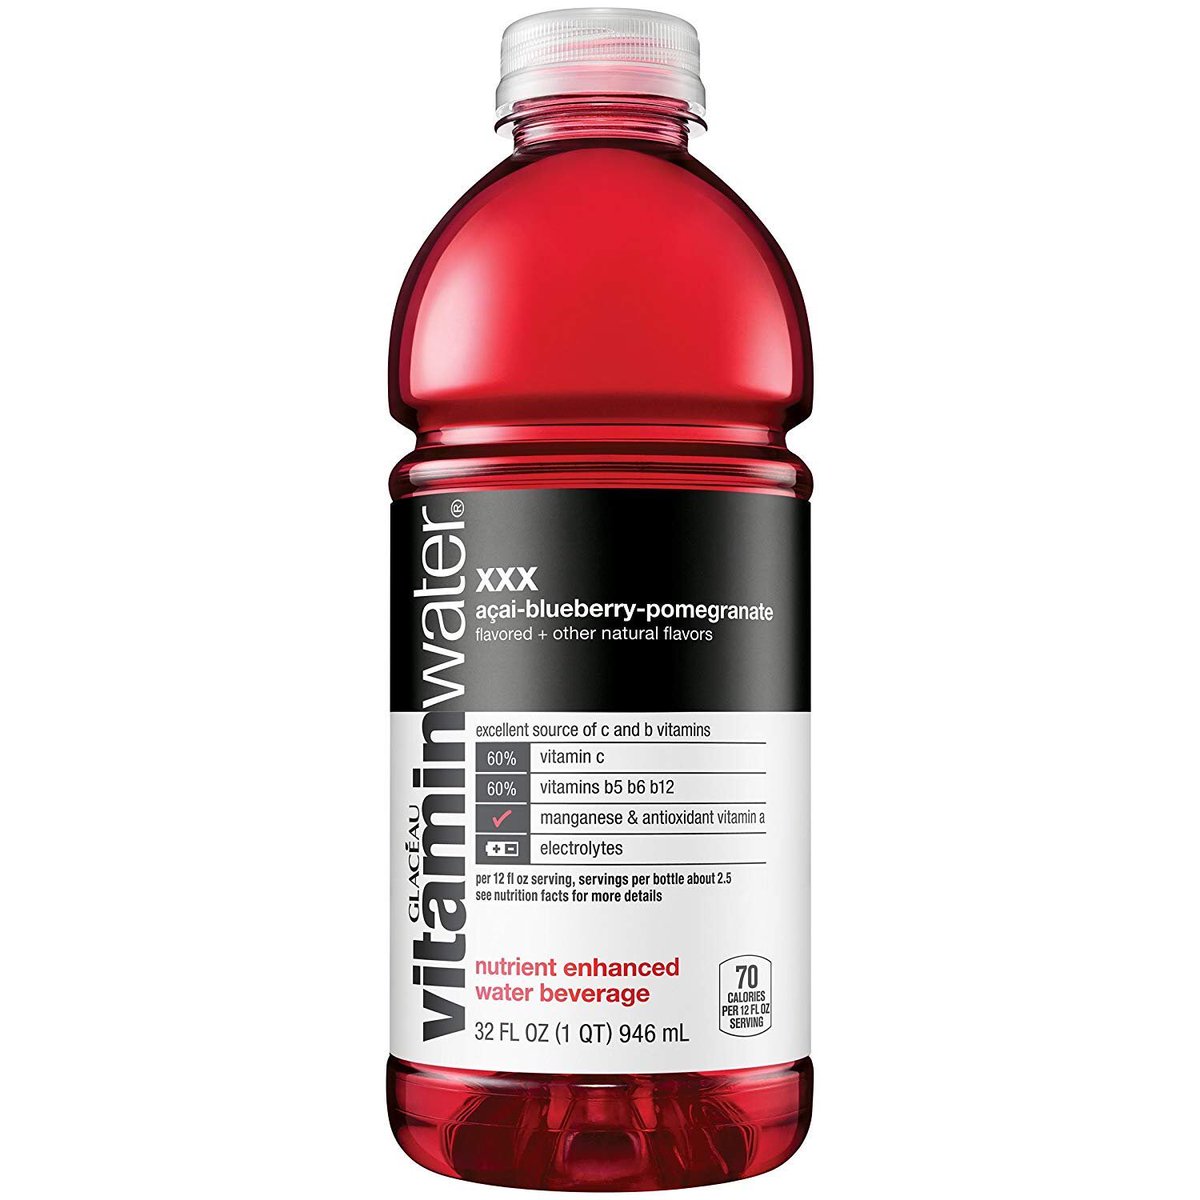 10. “walmart insulin” — vitamin water MISLEADING, the same name as the above items but an ENTIRELY DIFFERENT PRODUCT